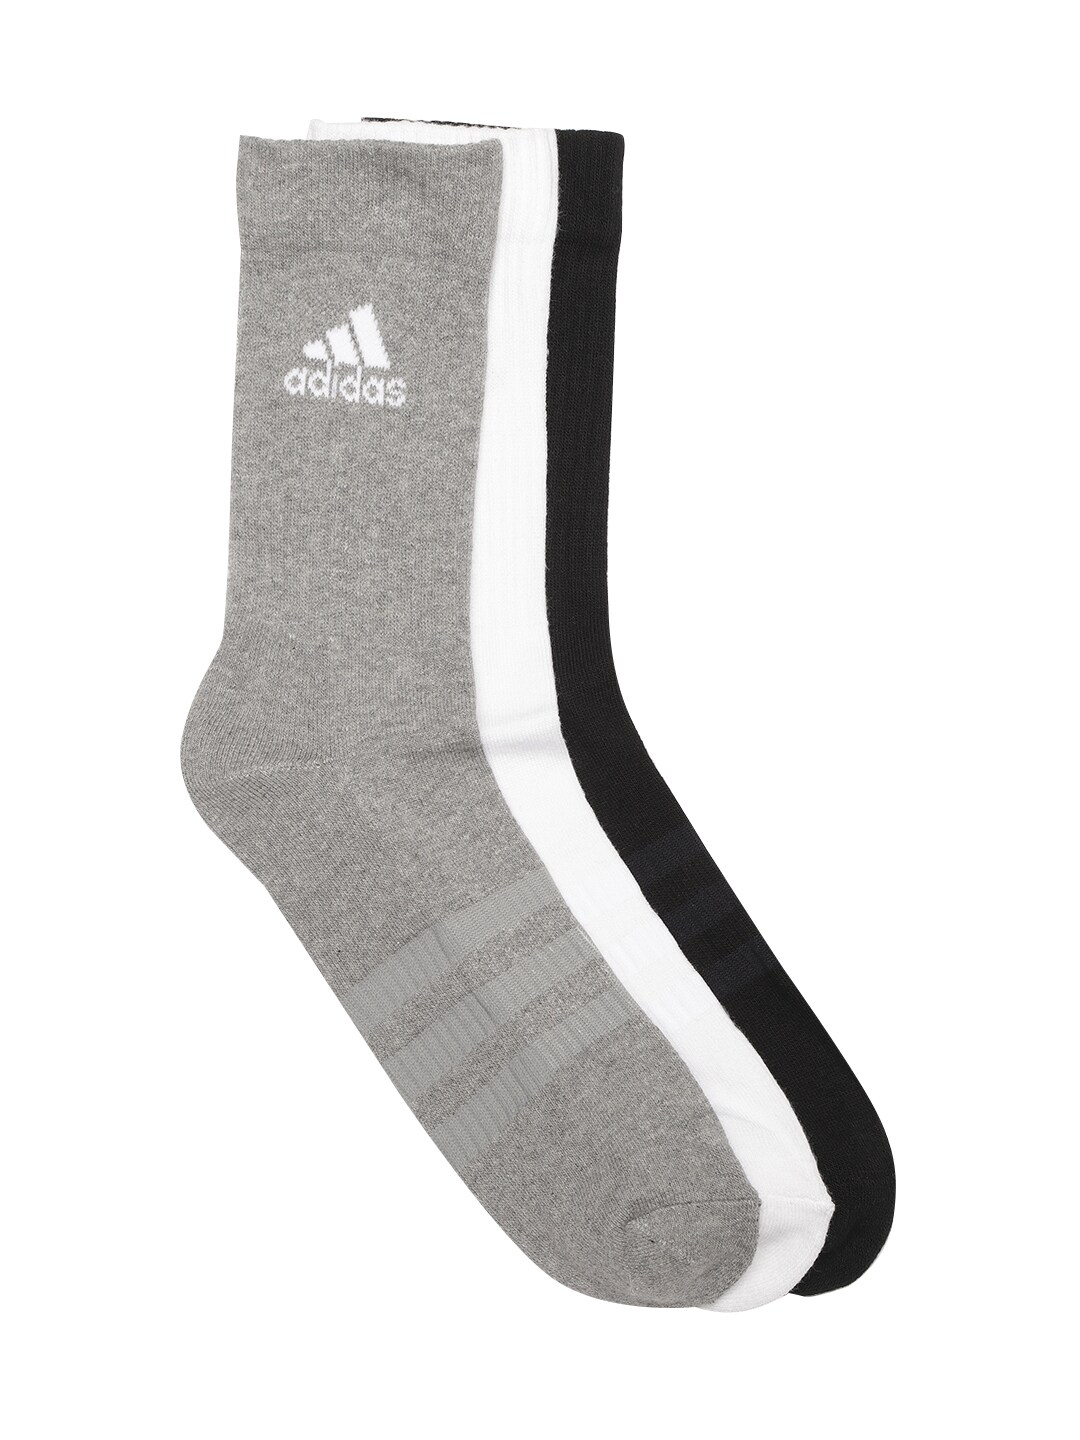 ADIDAS Unisex Pack of 3 Solid Cush CRW Ankle-Length Socks with Striped Detail Price in India